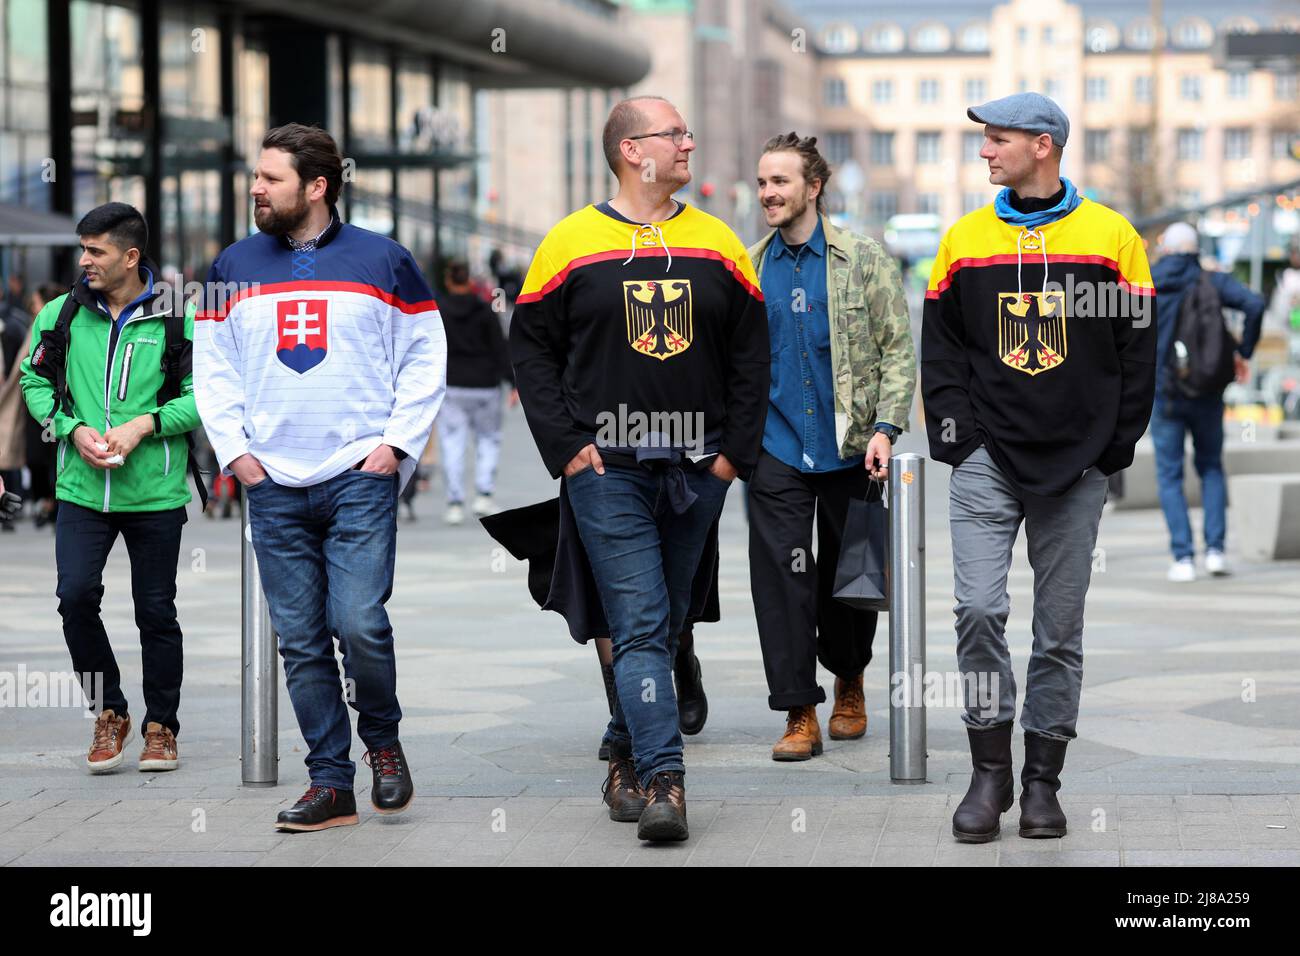 Fans of the German and Slovakian national ice hockey teams seen walking in Helsinki city center. On May 13, the Ice Hockey World Championship 2022 began in Finland. Hockey fans from many countries arrived in Helsinki and Tampere, the citys where the matches will take place. Stock Photo